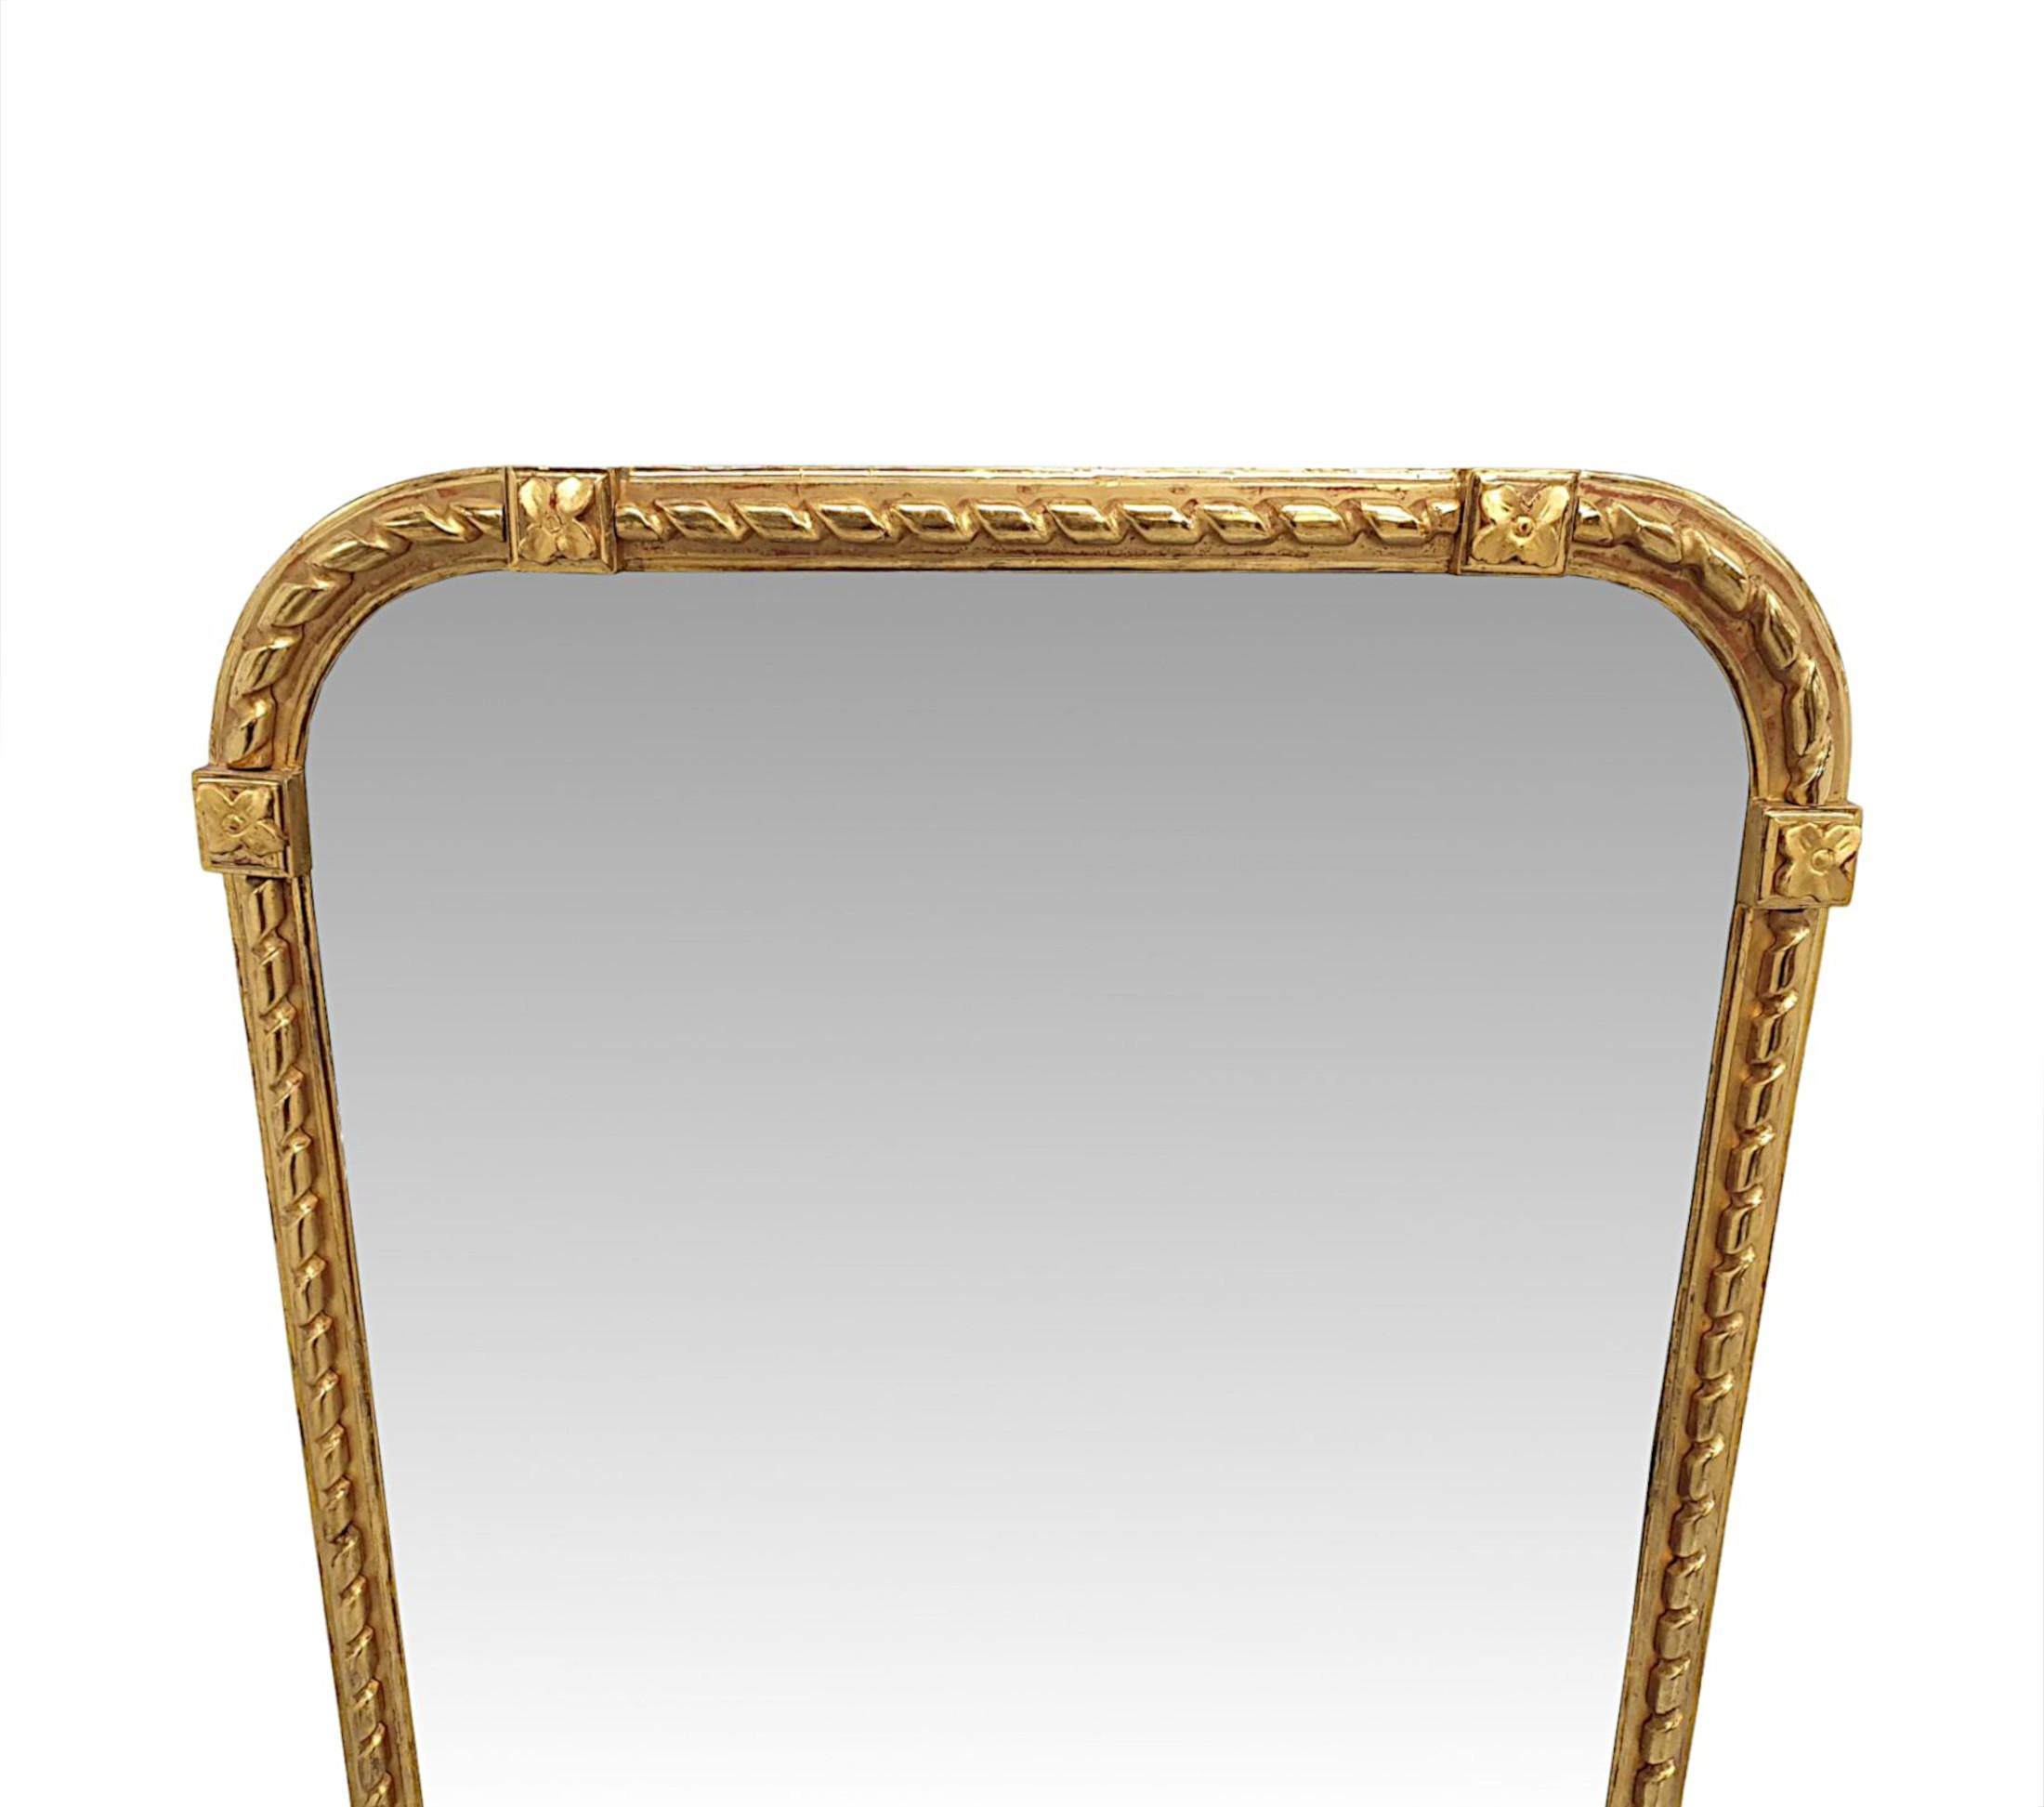 A fabulous 19th Century overmantle mirror finely hand carved and of exceptional quality.  The mirror glass plate of archtop form is set within an elegant, moulded and fluted giltwood frame with gorgeous ribbon twist detail and applied flowerhead